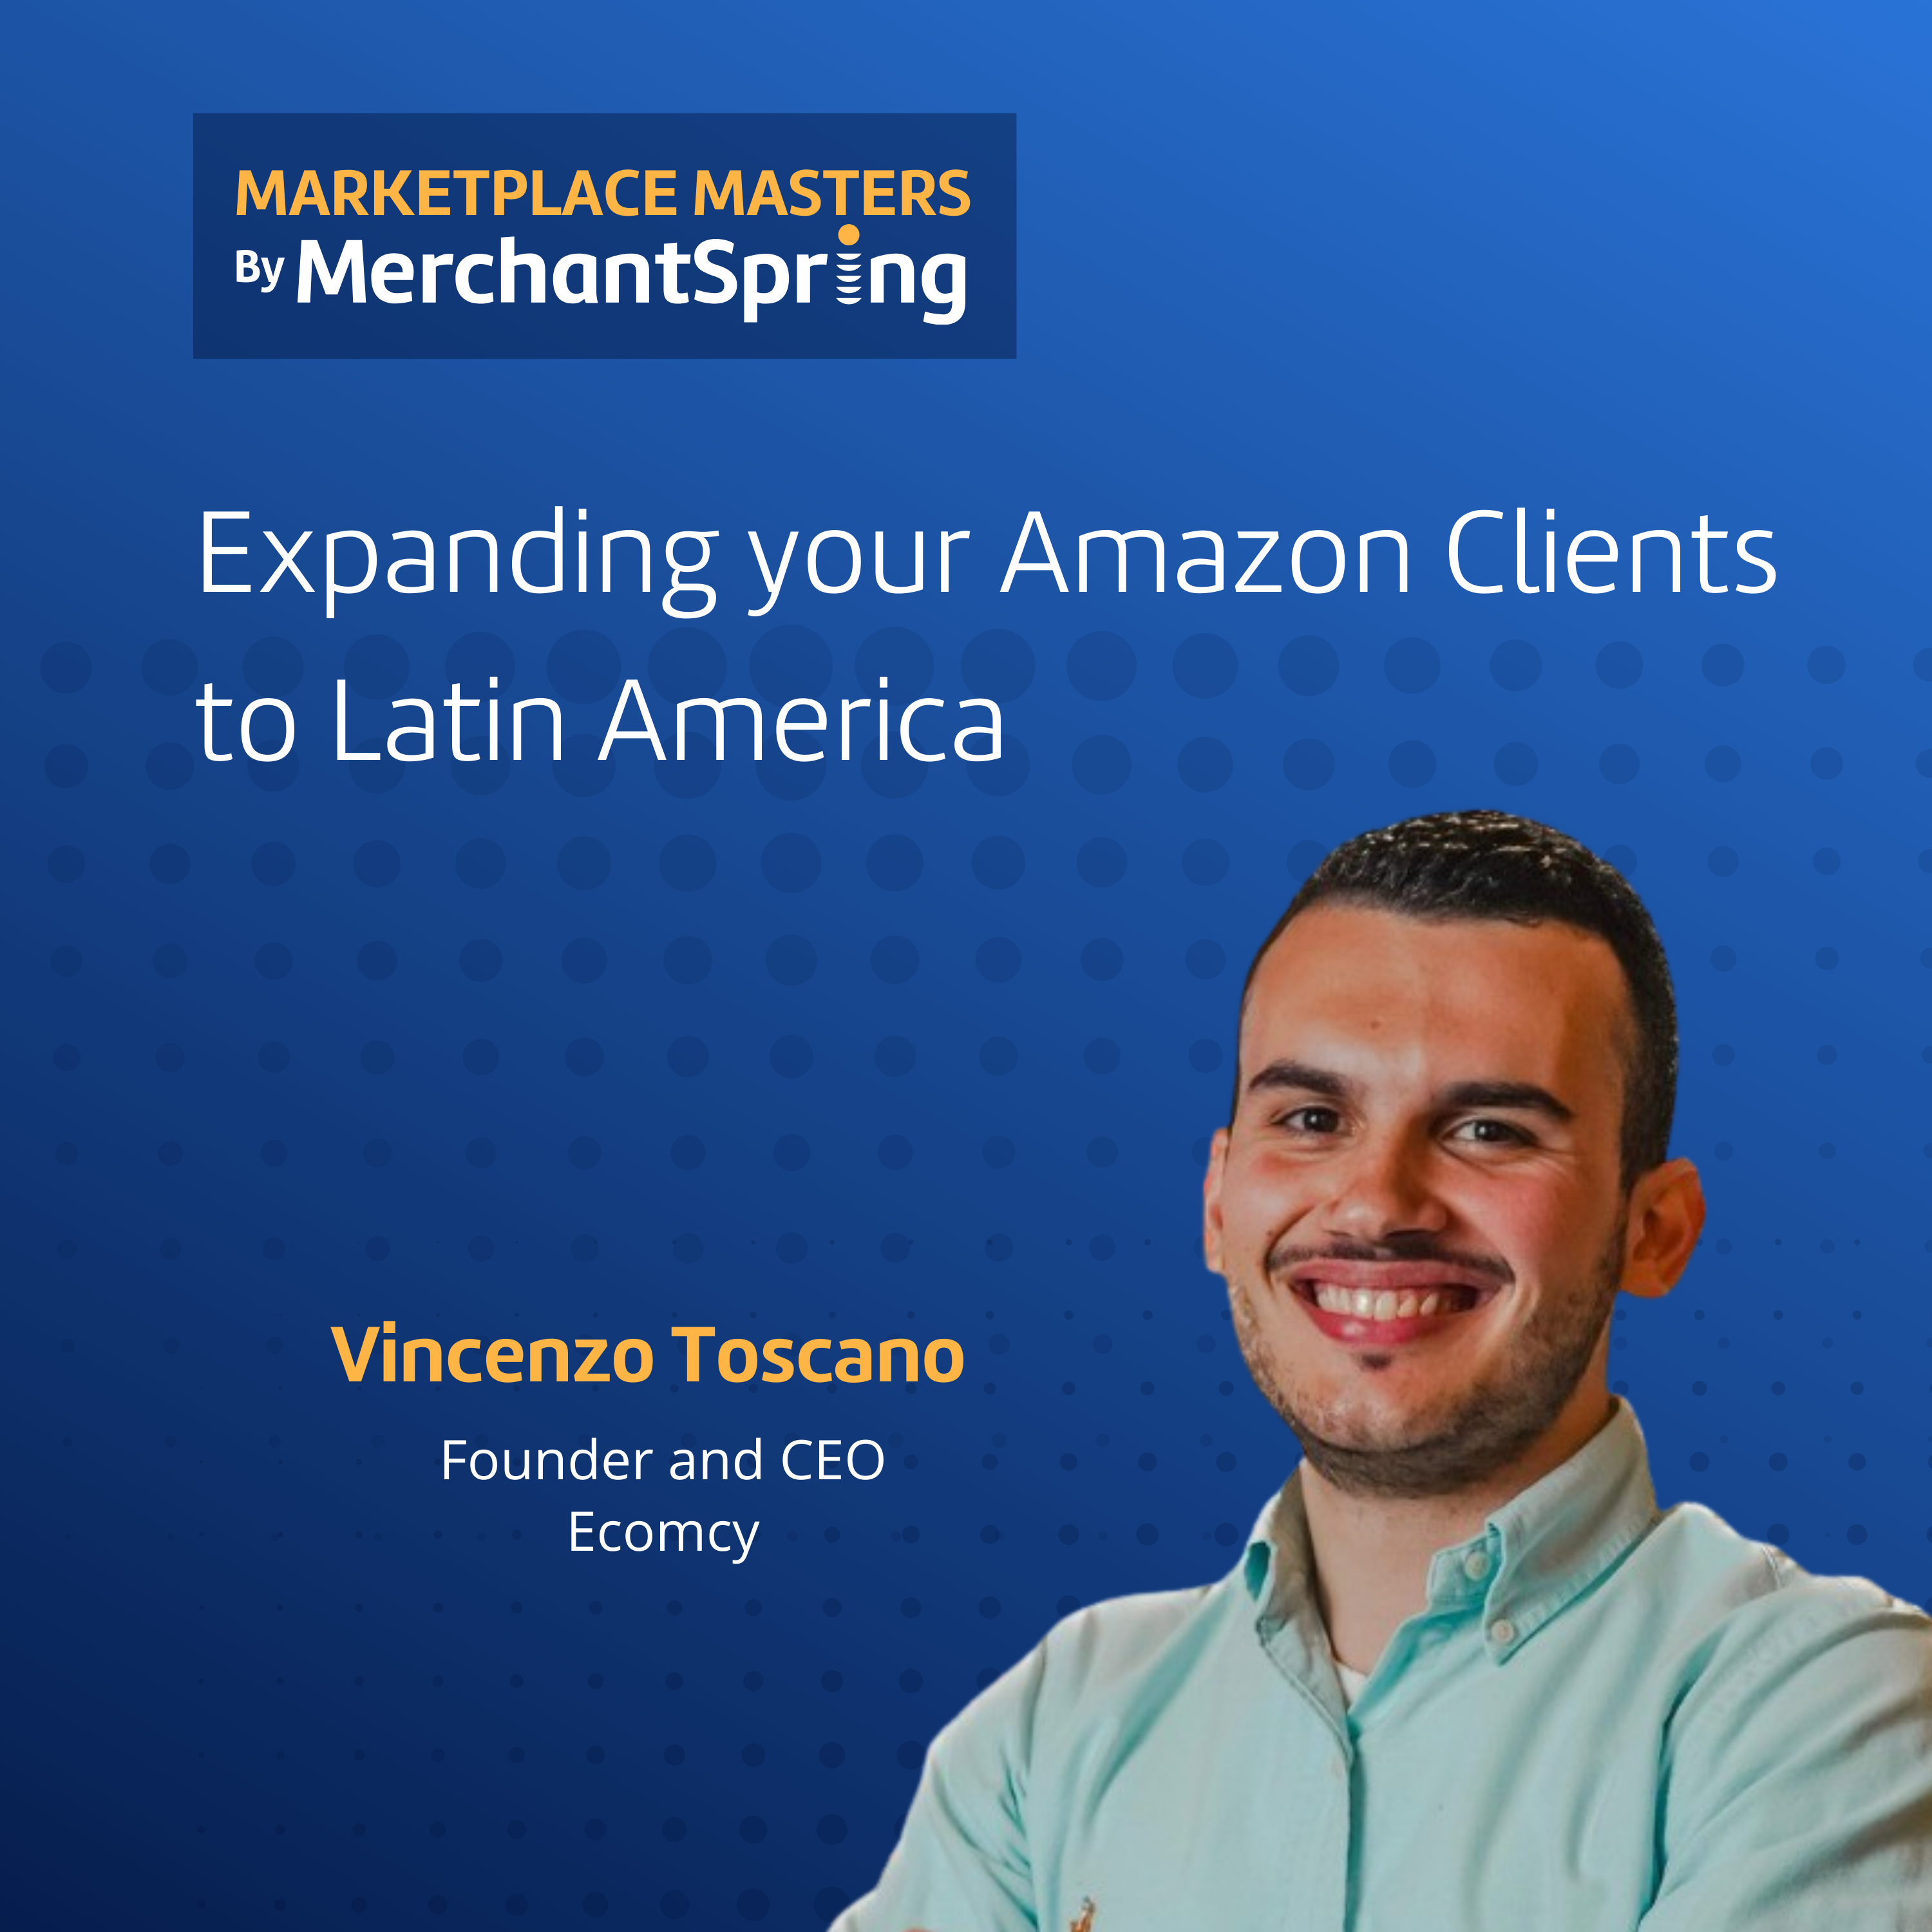 Expanding your Amazon Clients to Latin America